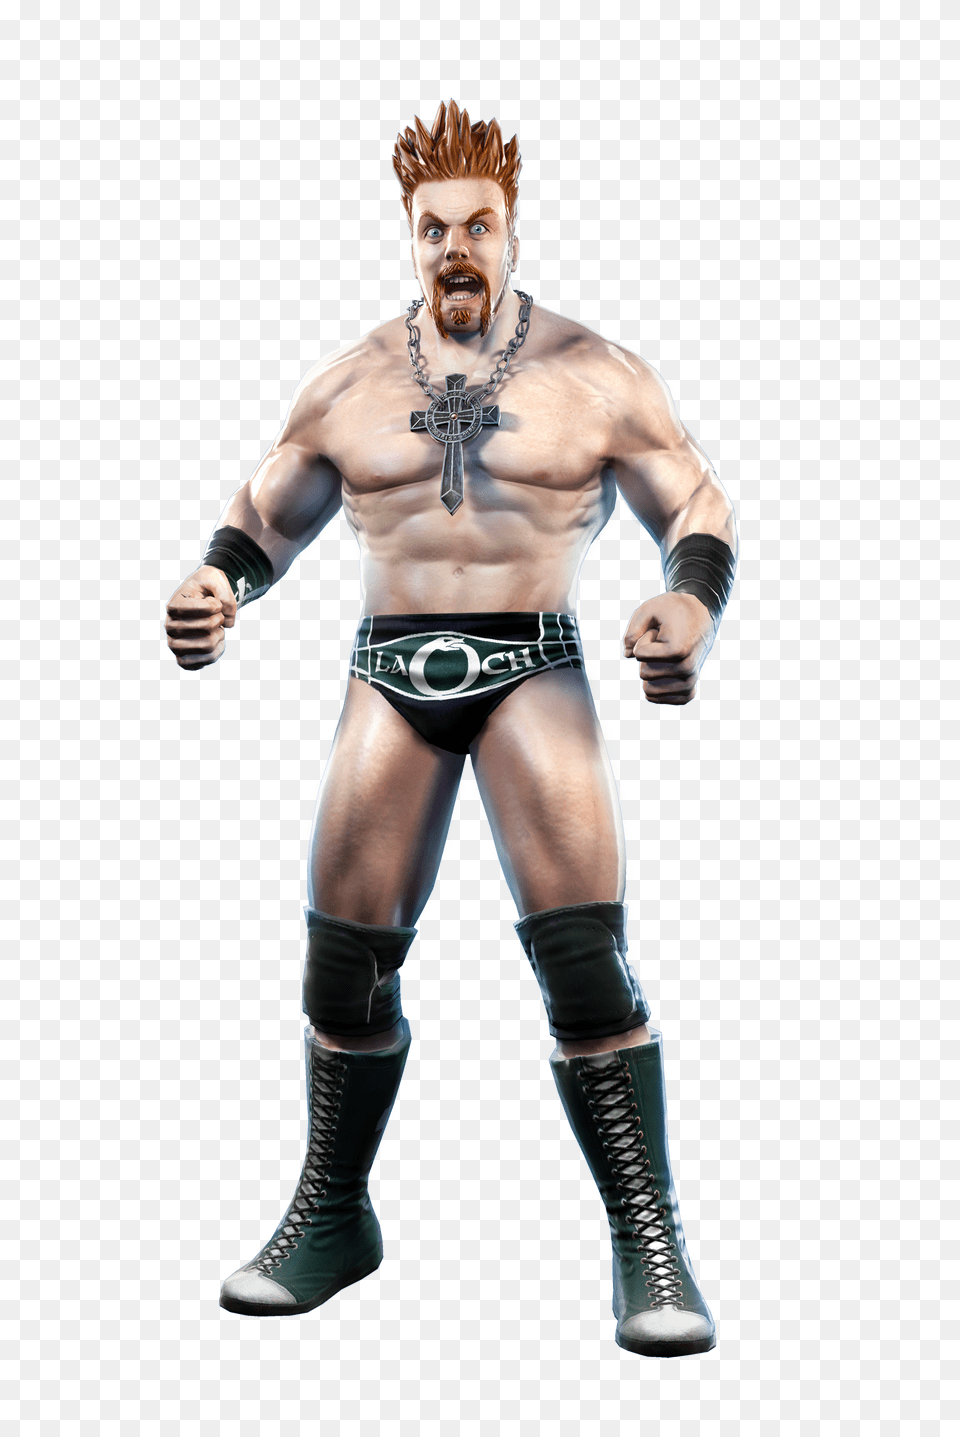 Wwe All Stars Sheamus Image With No Sheamus Wwe All Stars, Adult, Person, Man, Male Free Transparent Png